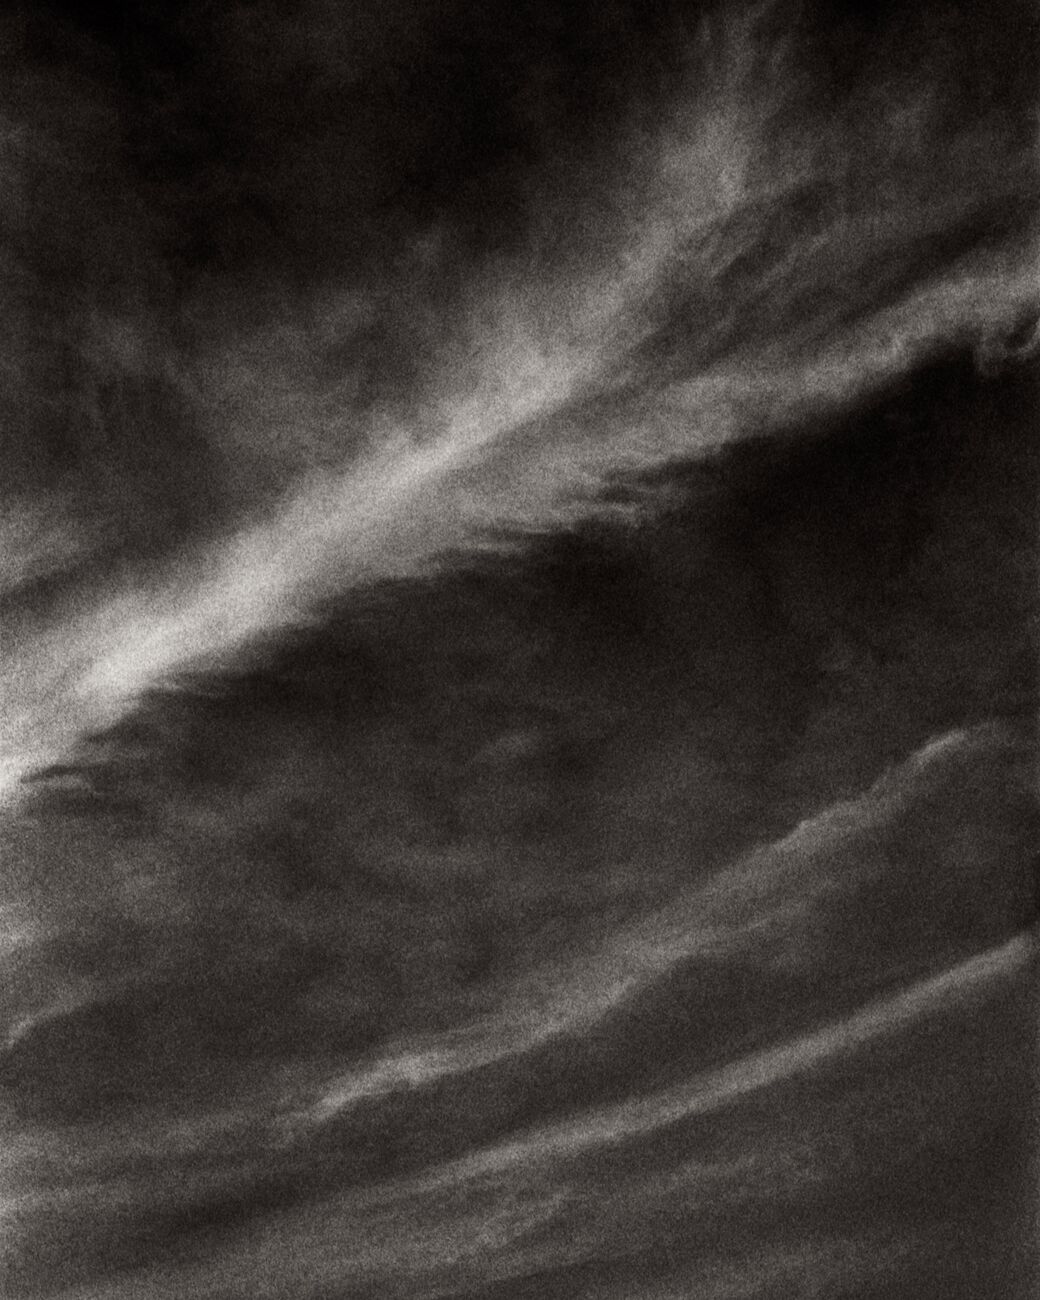 Photograph print 22 x 27.6 in, Sky, etude 1. Ref-11618-5 - Denis Olivier Photography